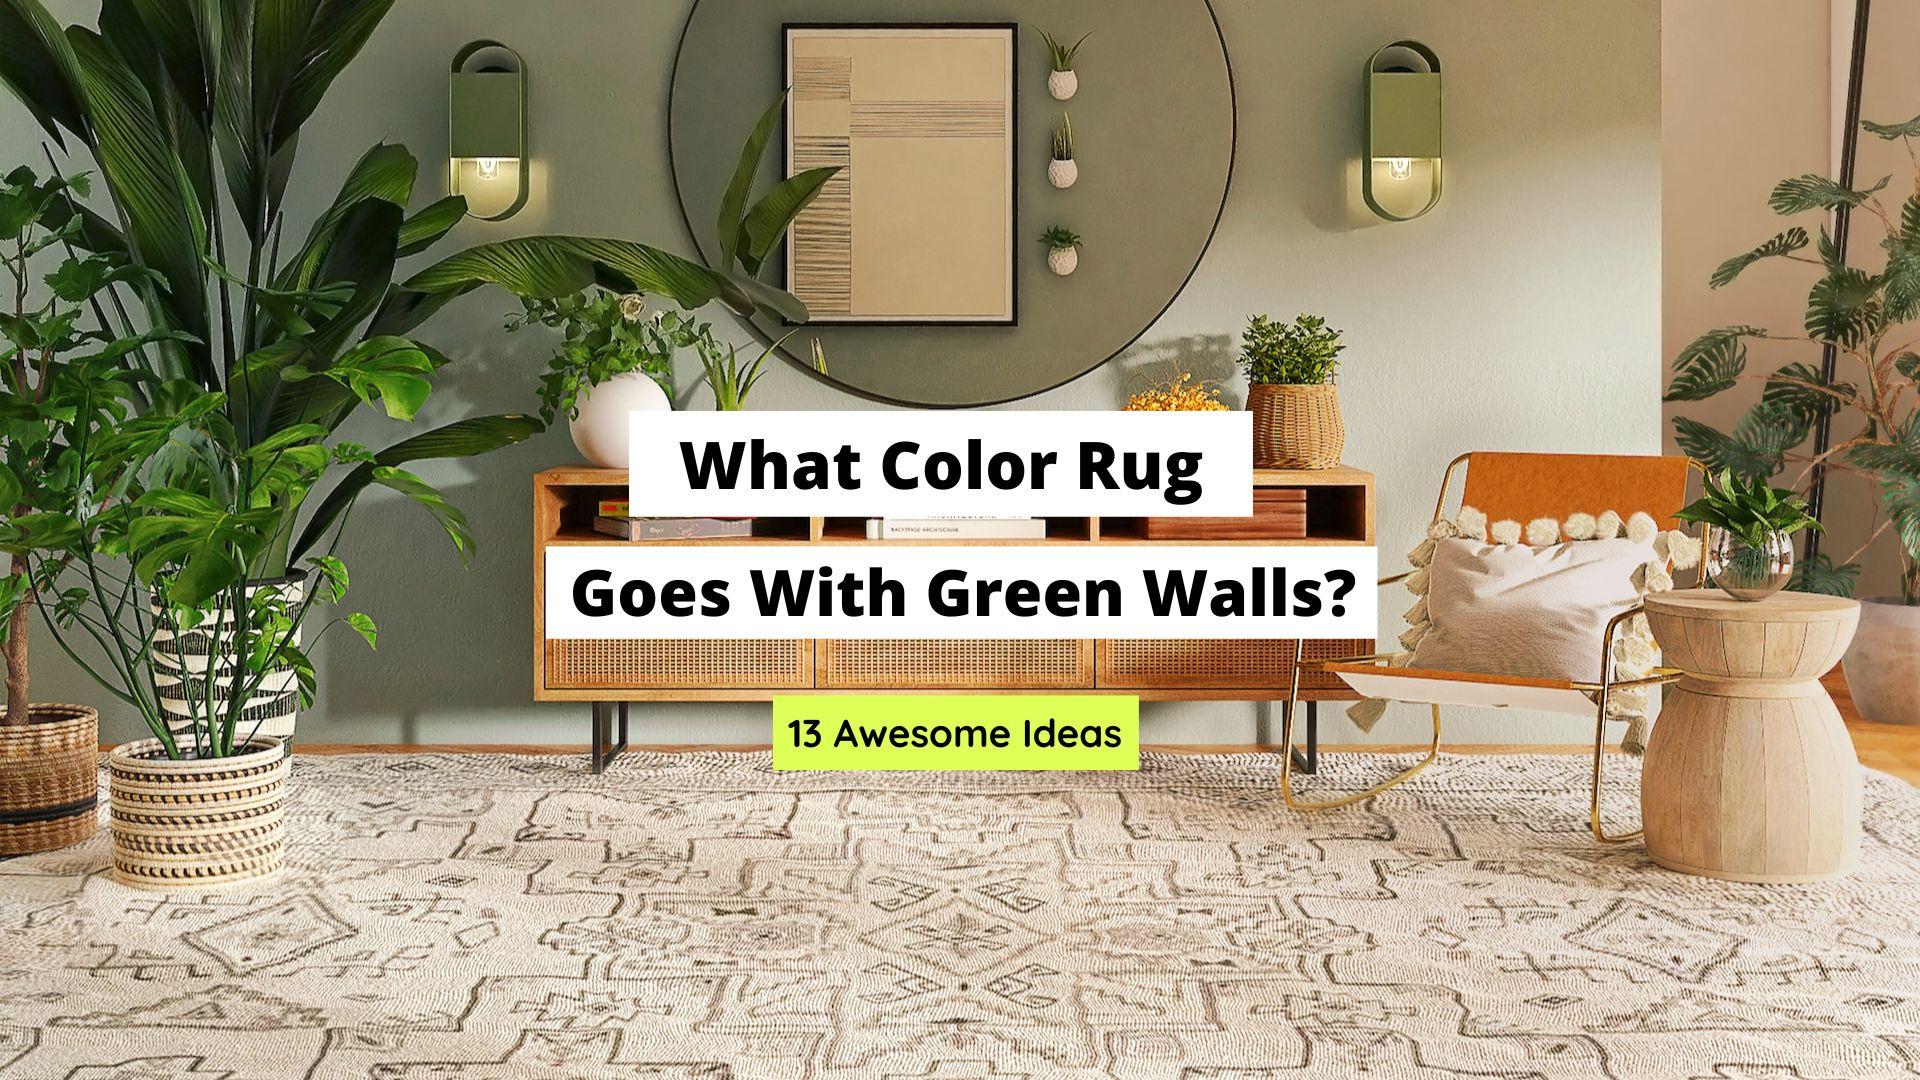 What Color Rug Goes With Green Walls